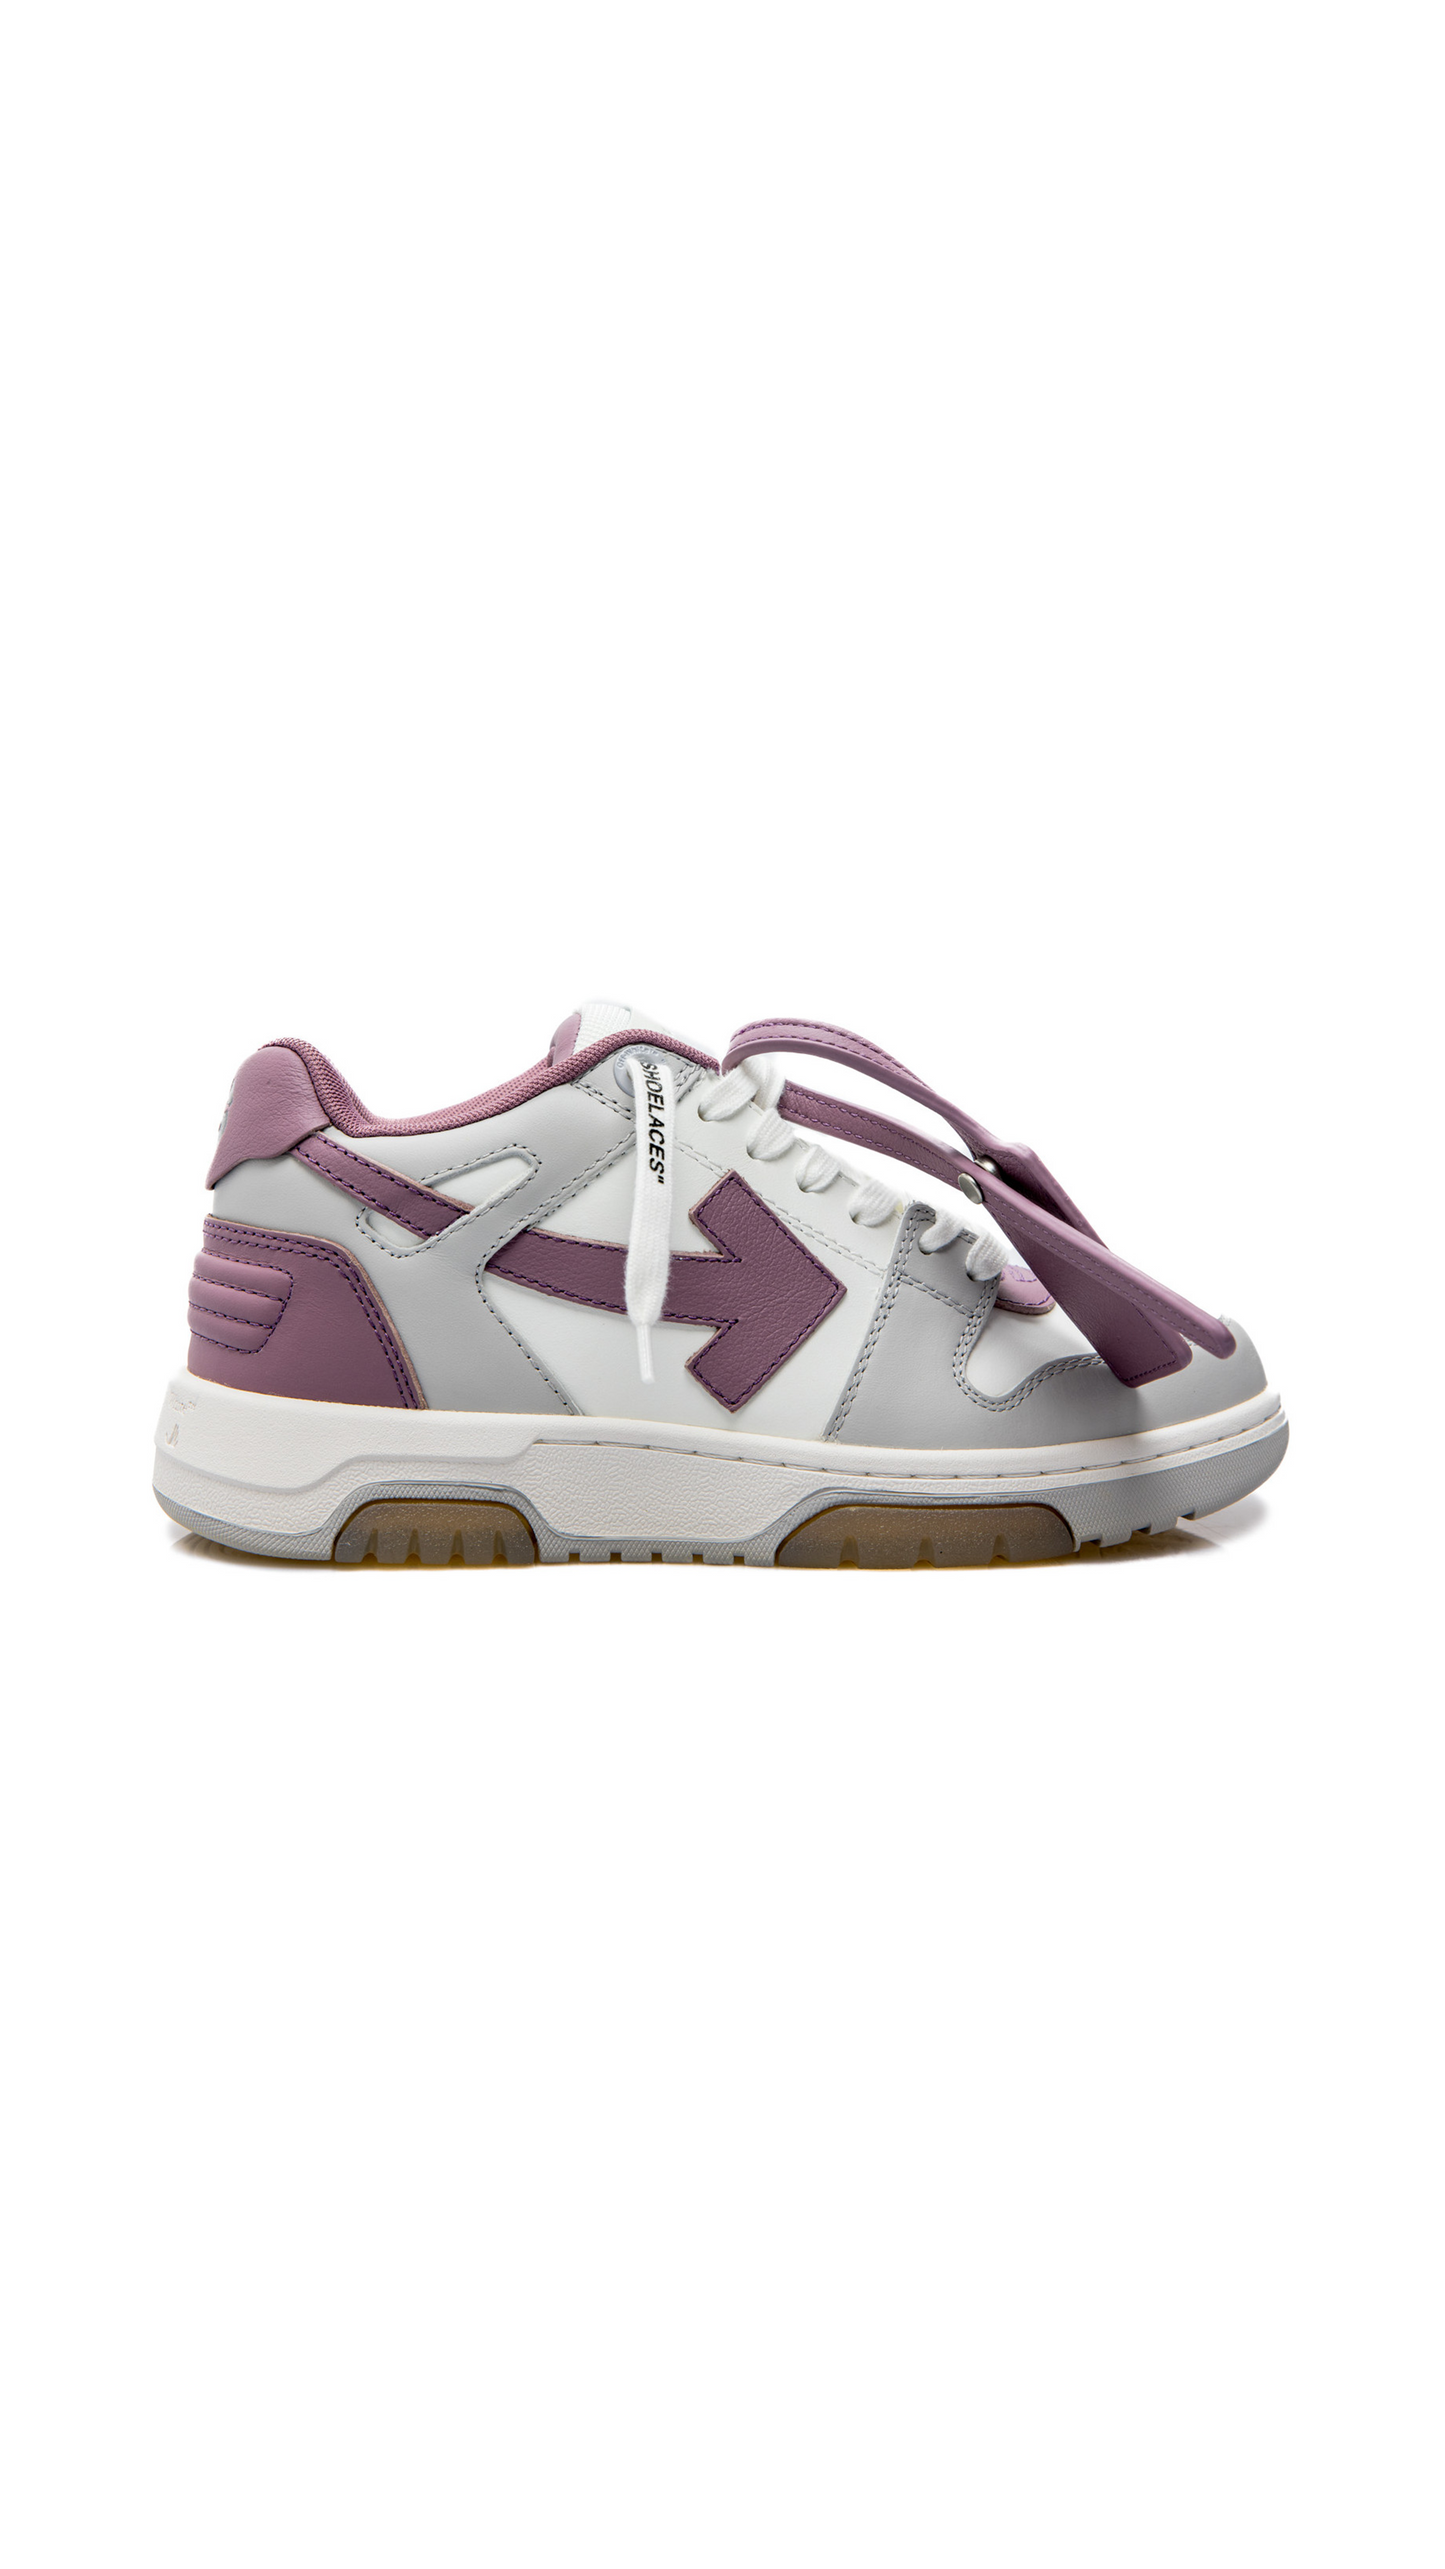 Out of Office Calf Leather Sneakers - White/Mauve